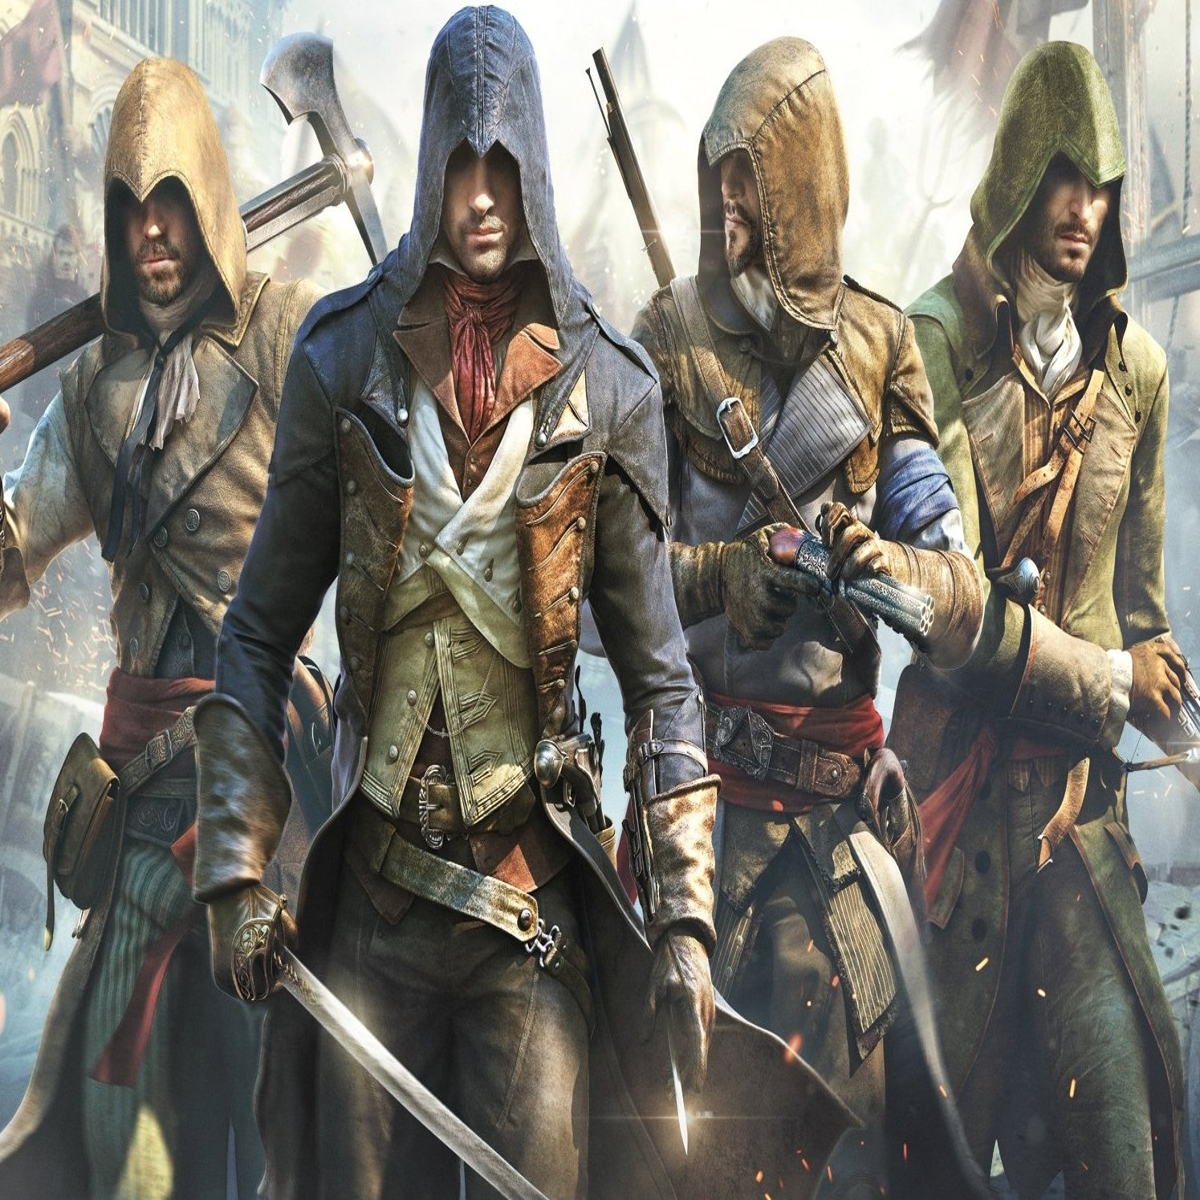 Does Assassin's Creed Unity feel like a generational leap? 